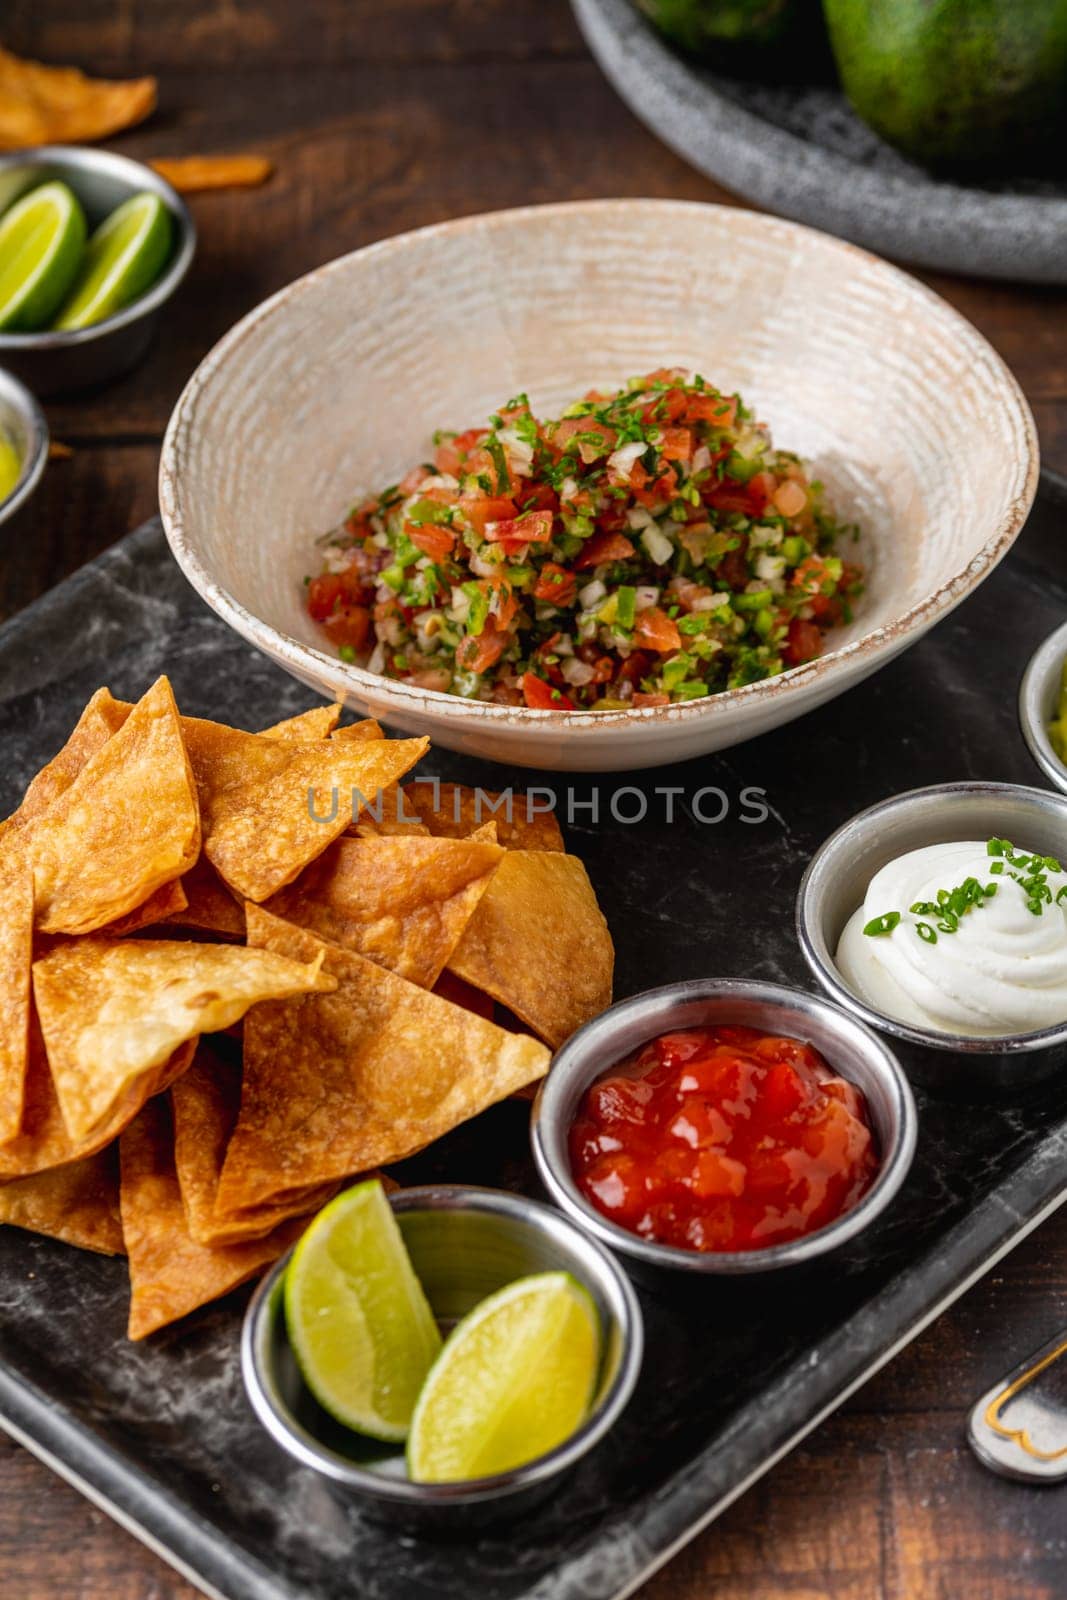 Pico de gallo from Mexican cuisine with dipping sauces on wooden table by Sonat